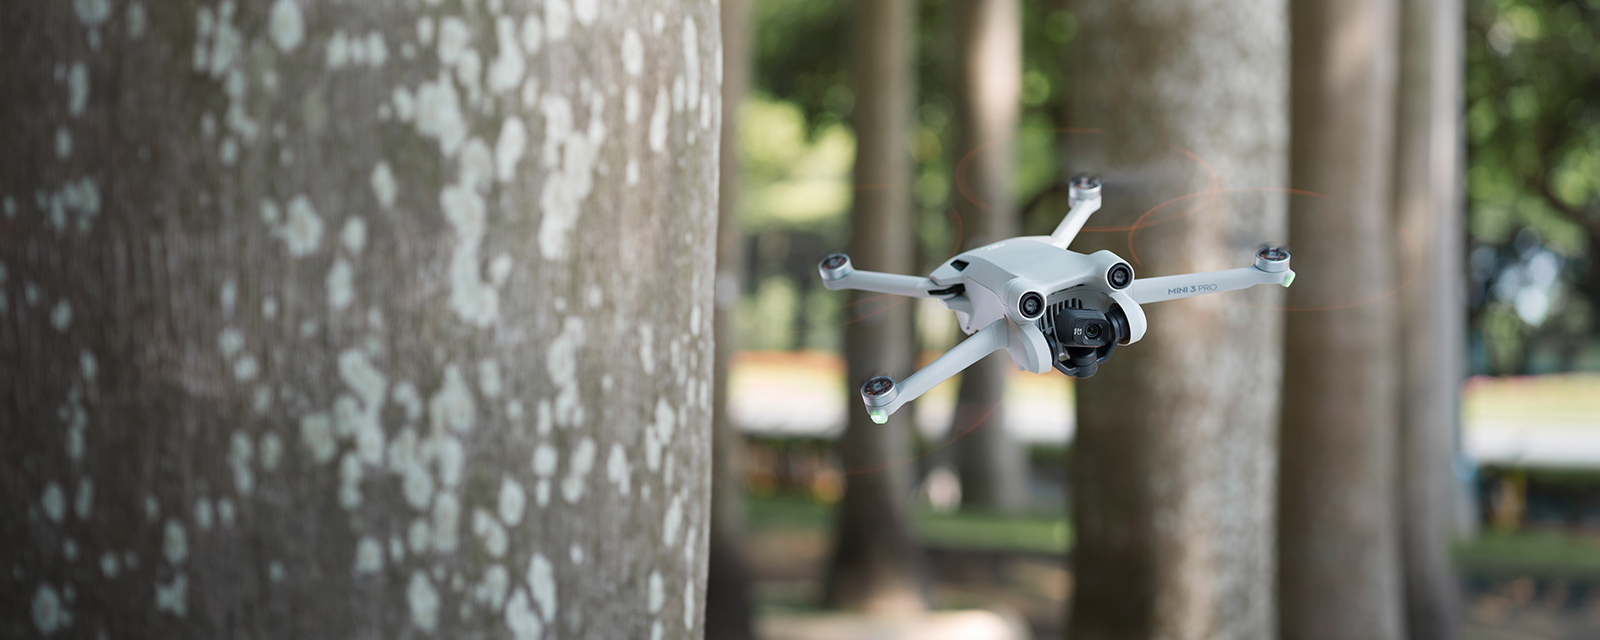 New Firmware Update for DJI Mini 3 Pro: Vertical Shooting Gets an Upgrade | D1 Lounge